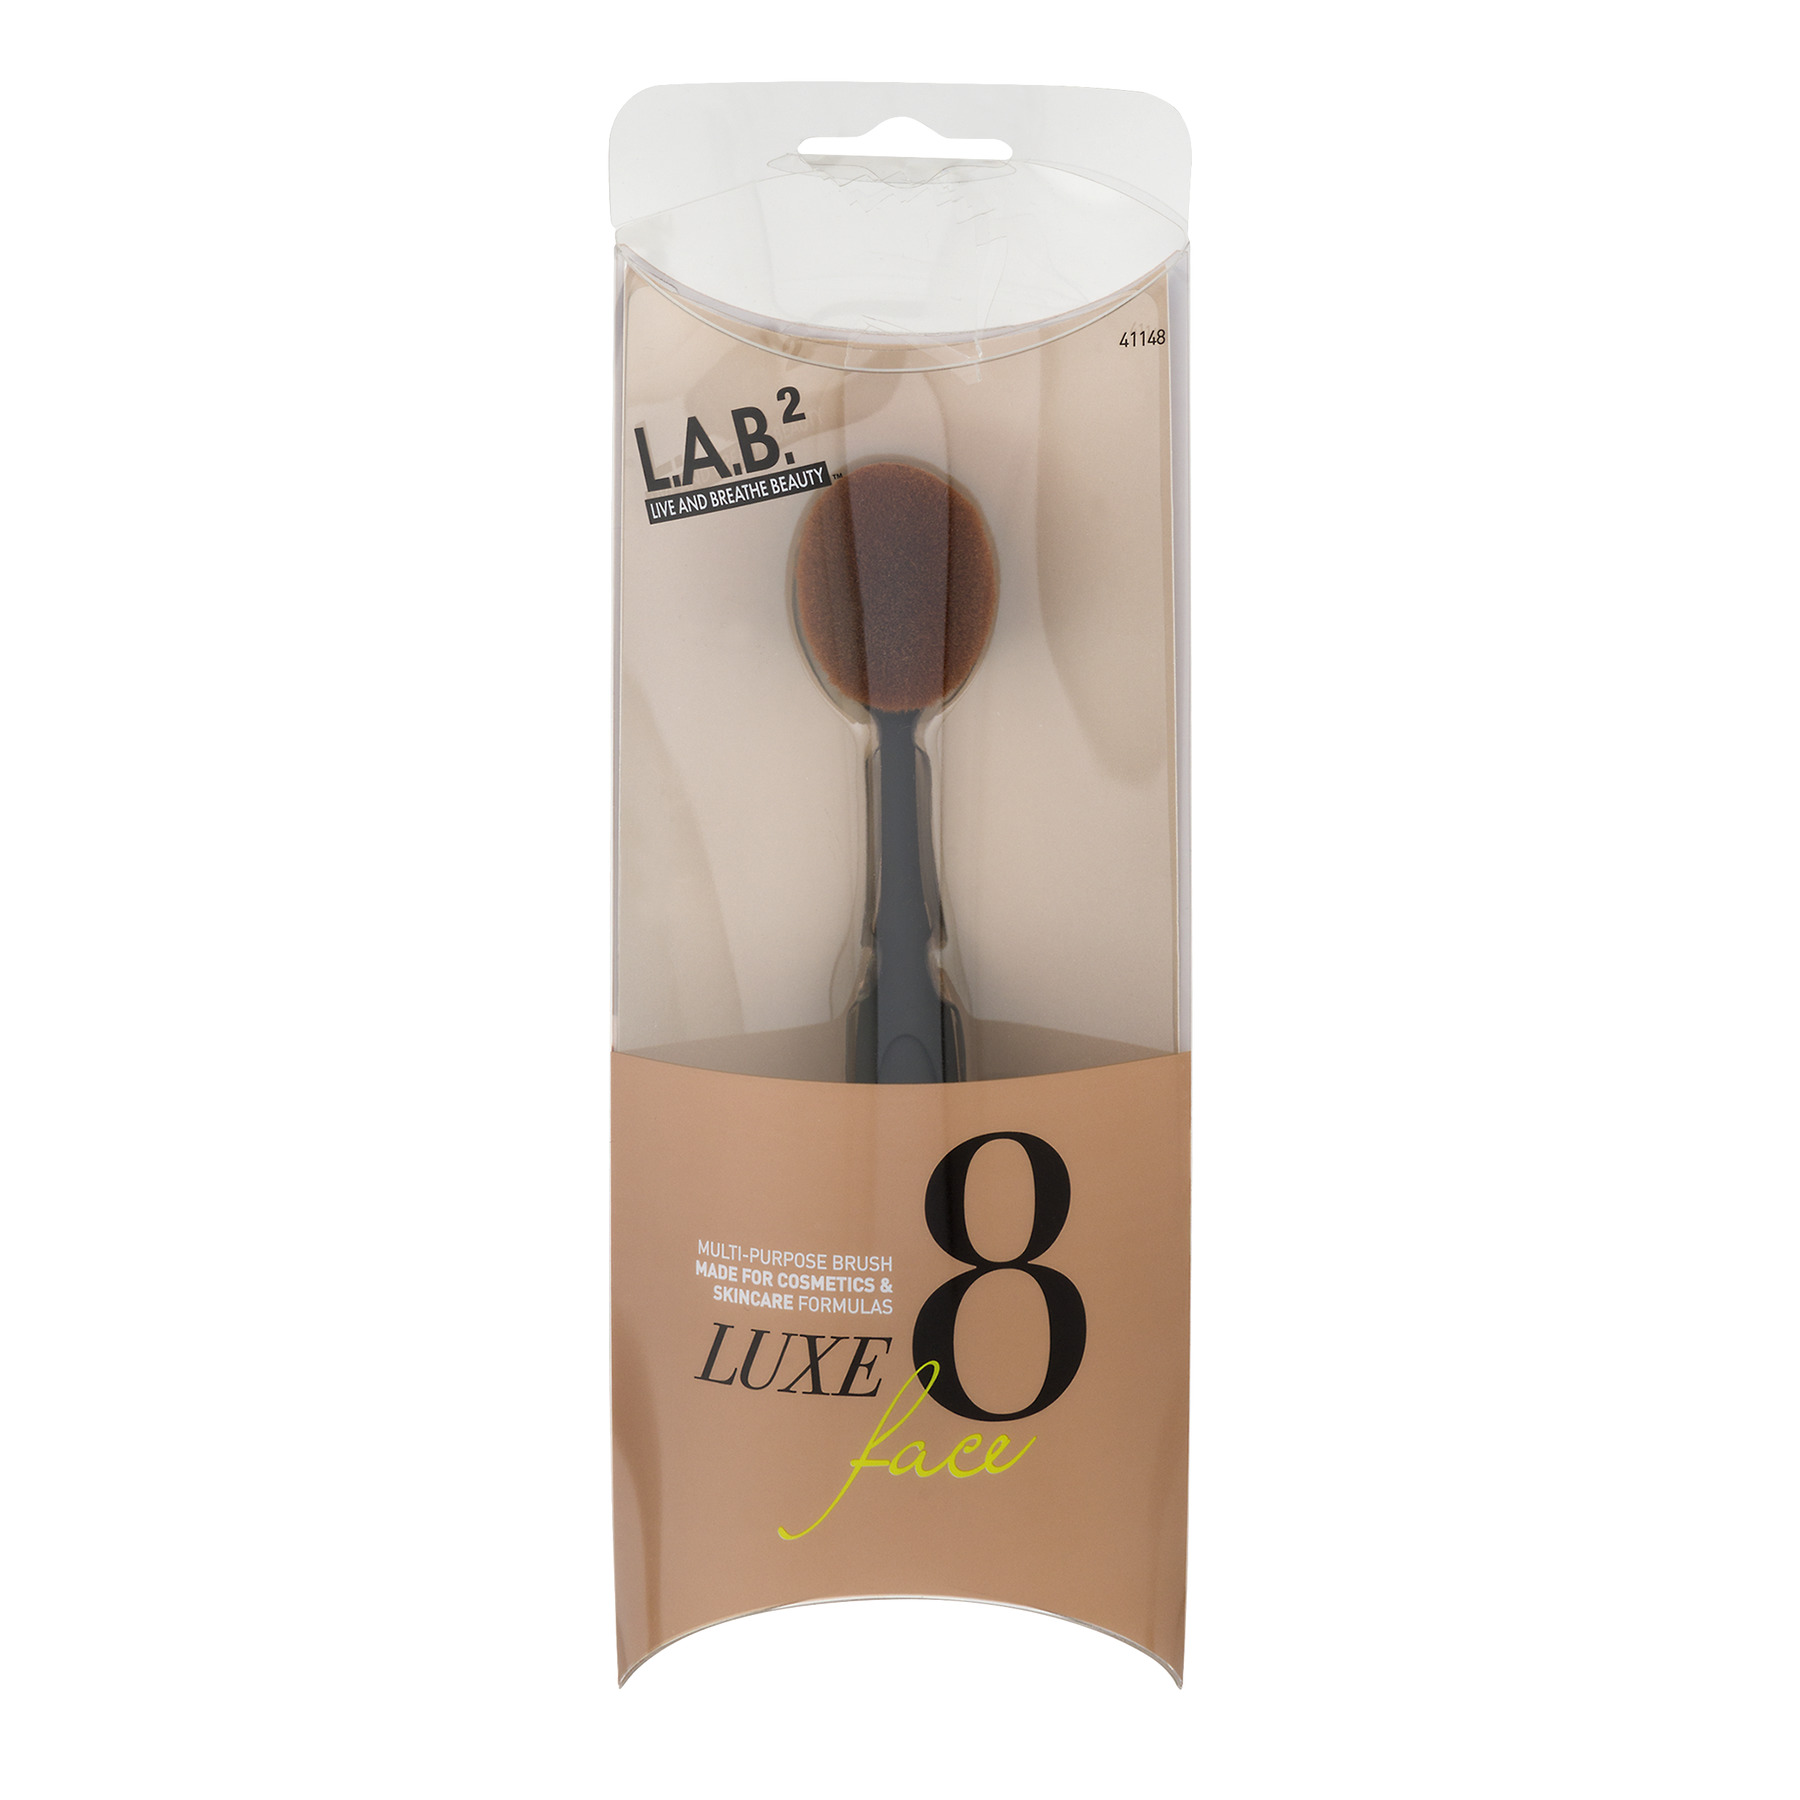 L.A.B.2 Luxe Oval Makeup & Skincare Brush, No. 8 for Face - image 1 of 2